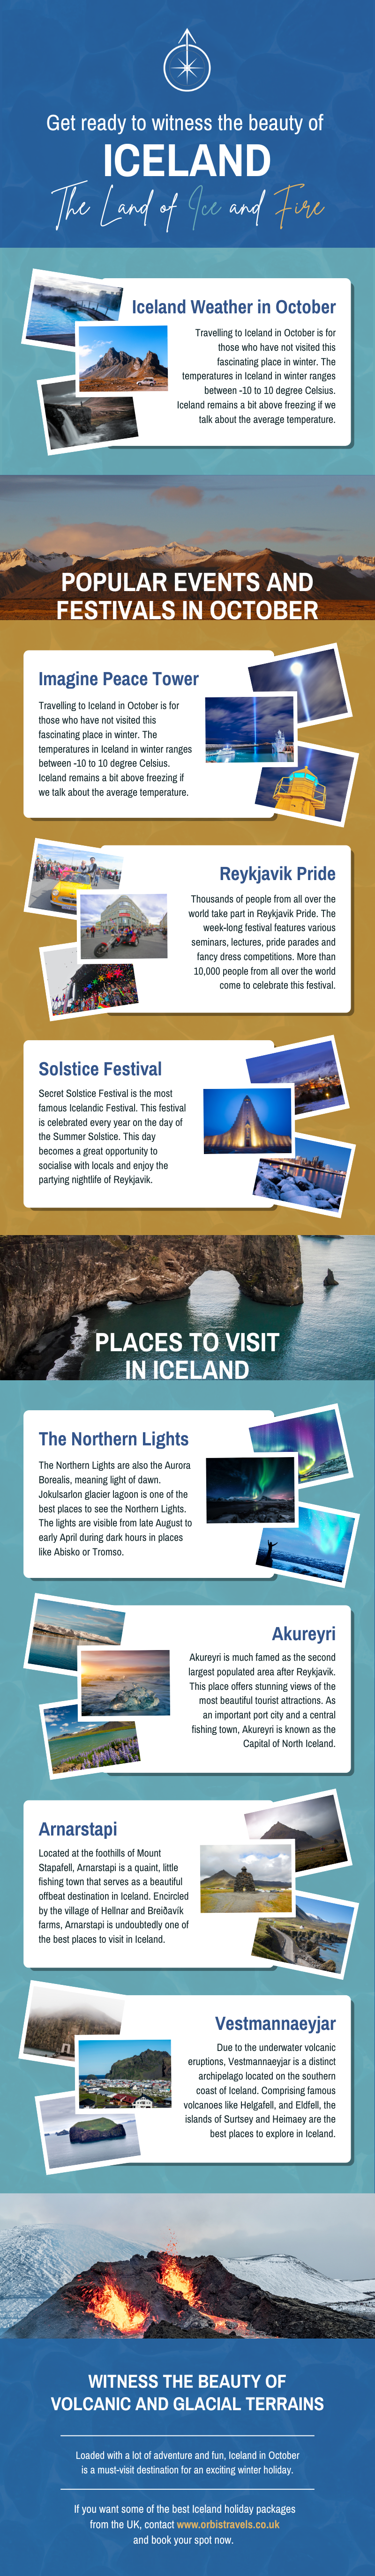 witness the beauty of iceland infographic - free download